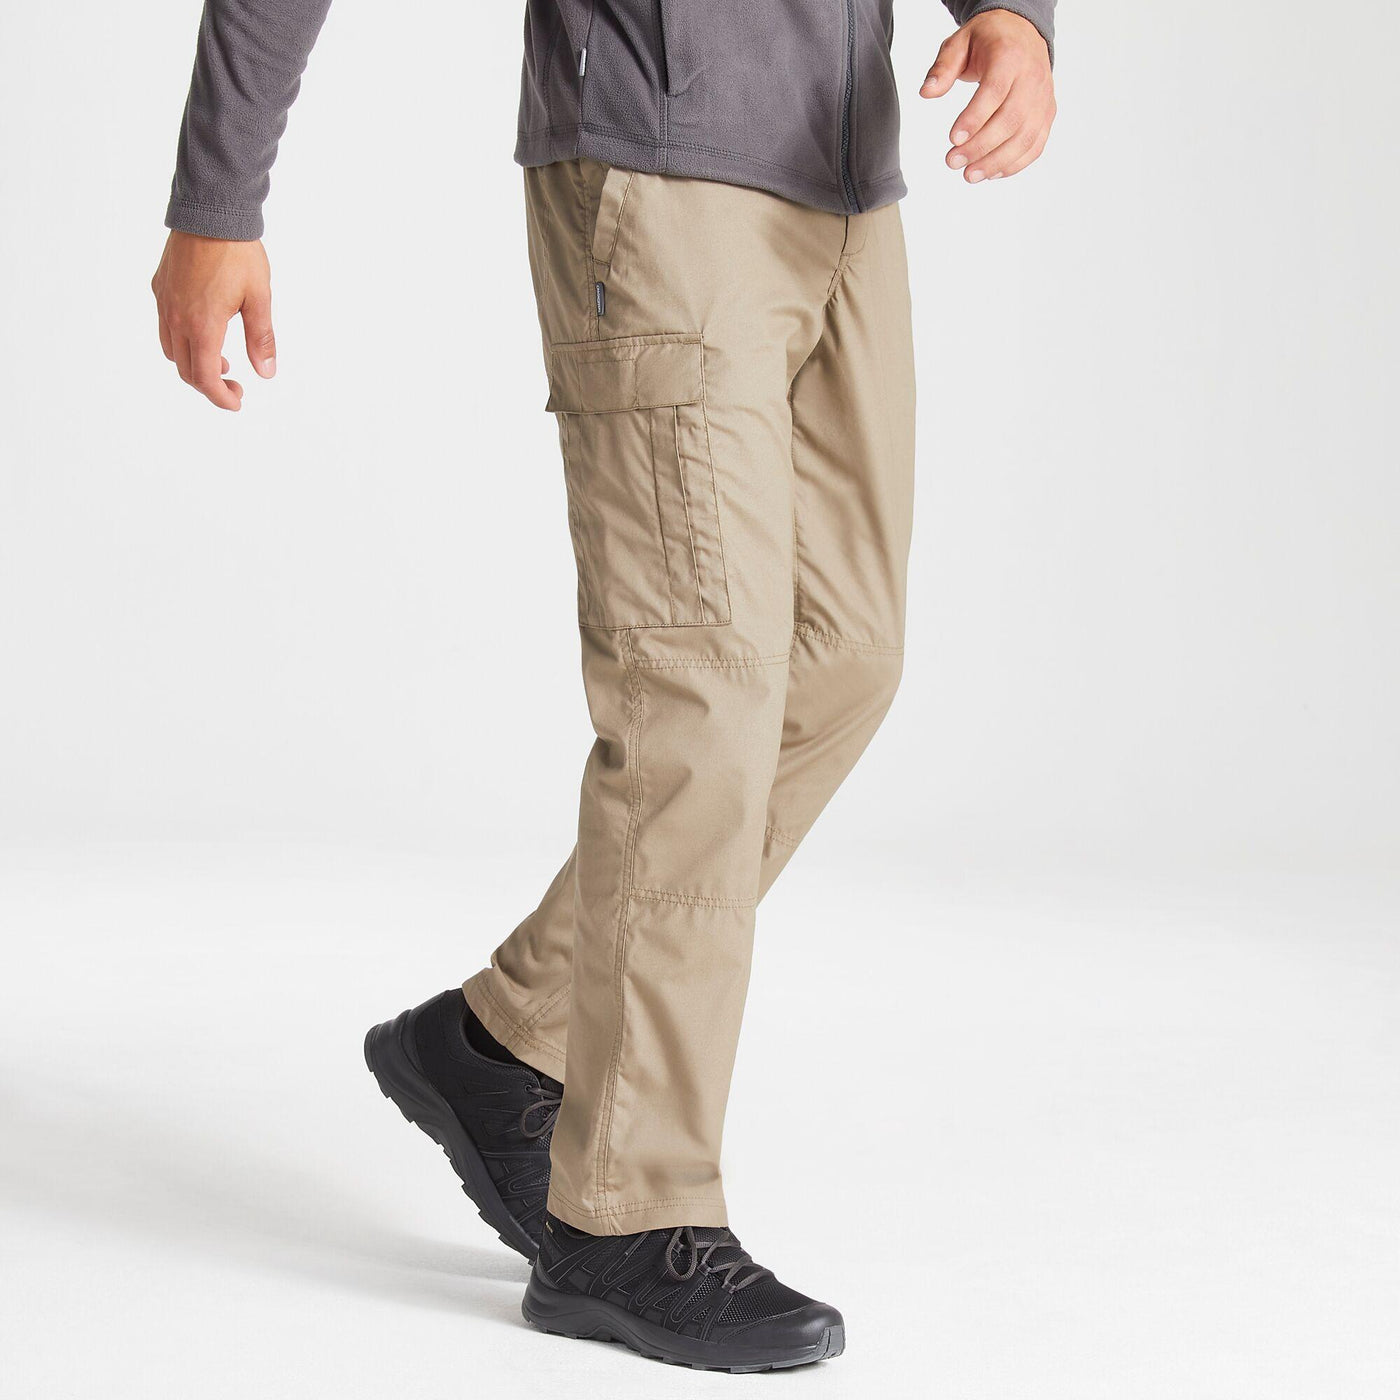 Craghoppers Expert Kiwi Tailored Trousers - Sale